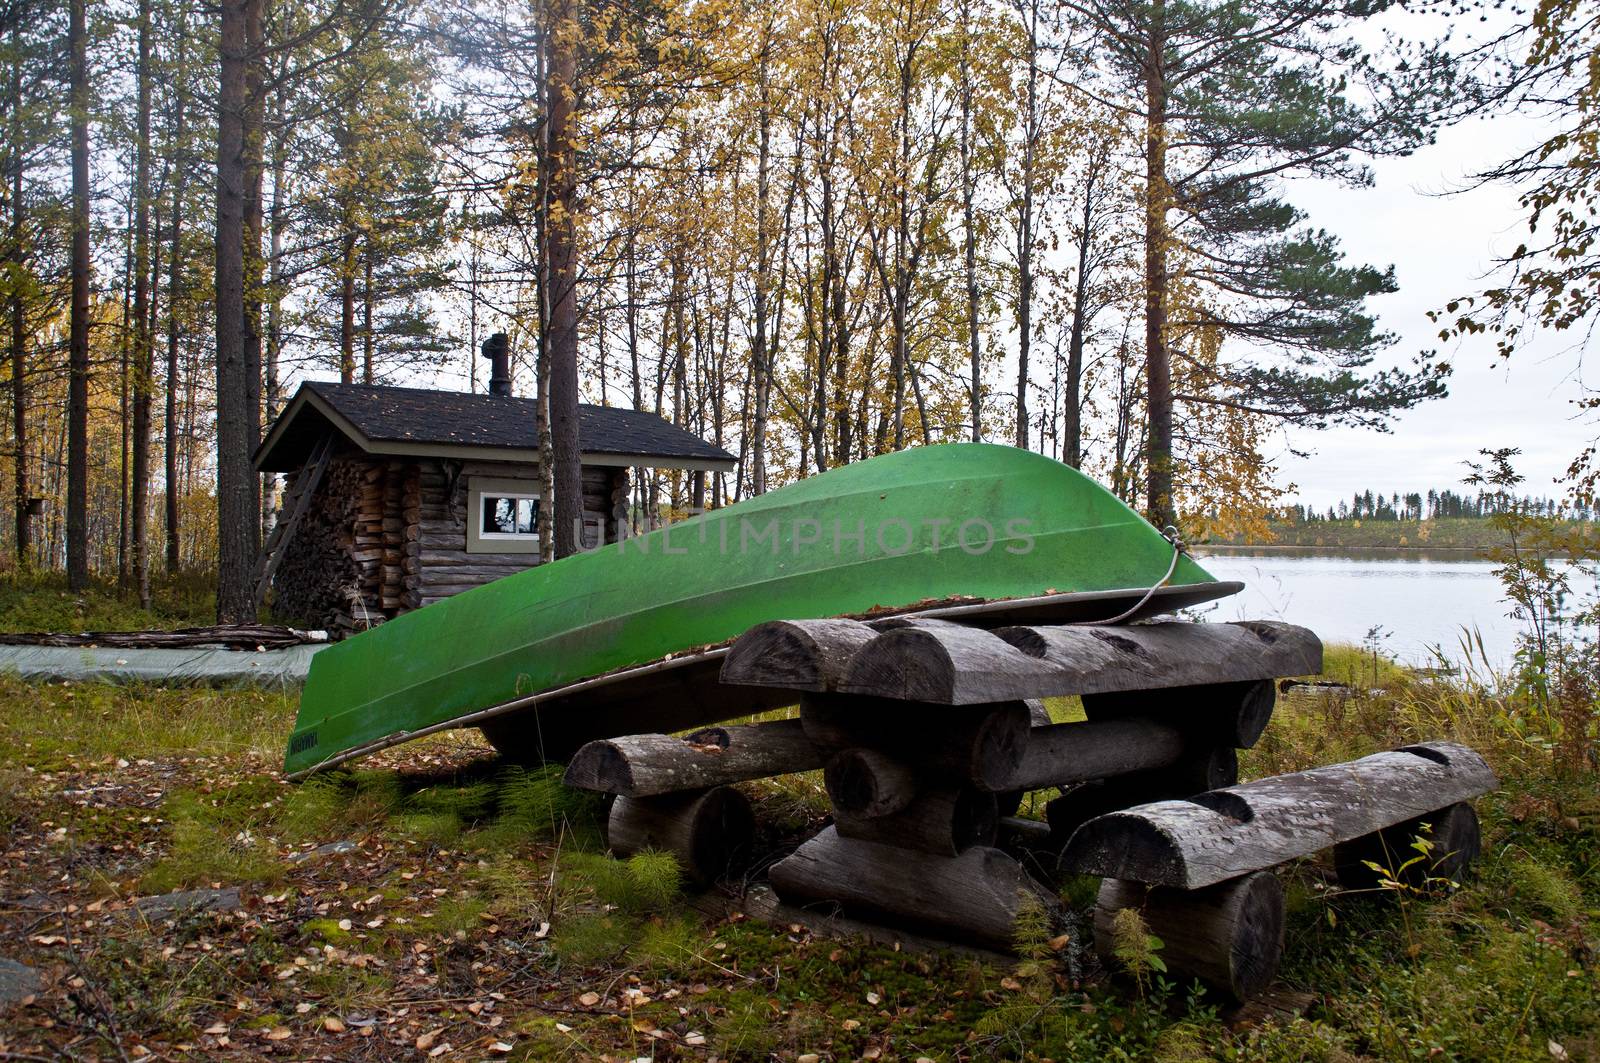 A cabin and boat at a lake in the region of Kainuu, Finland